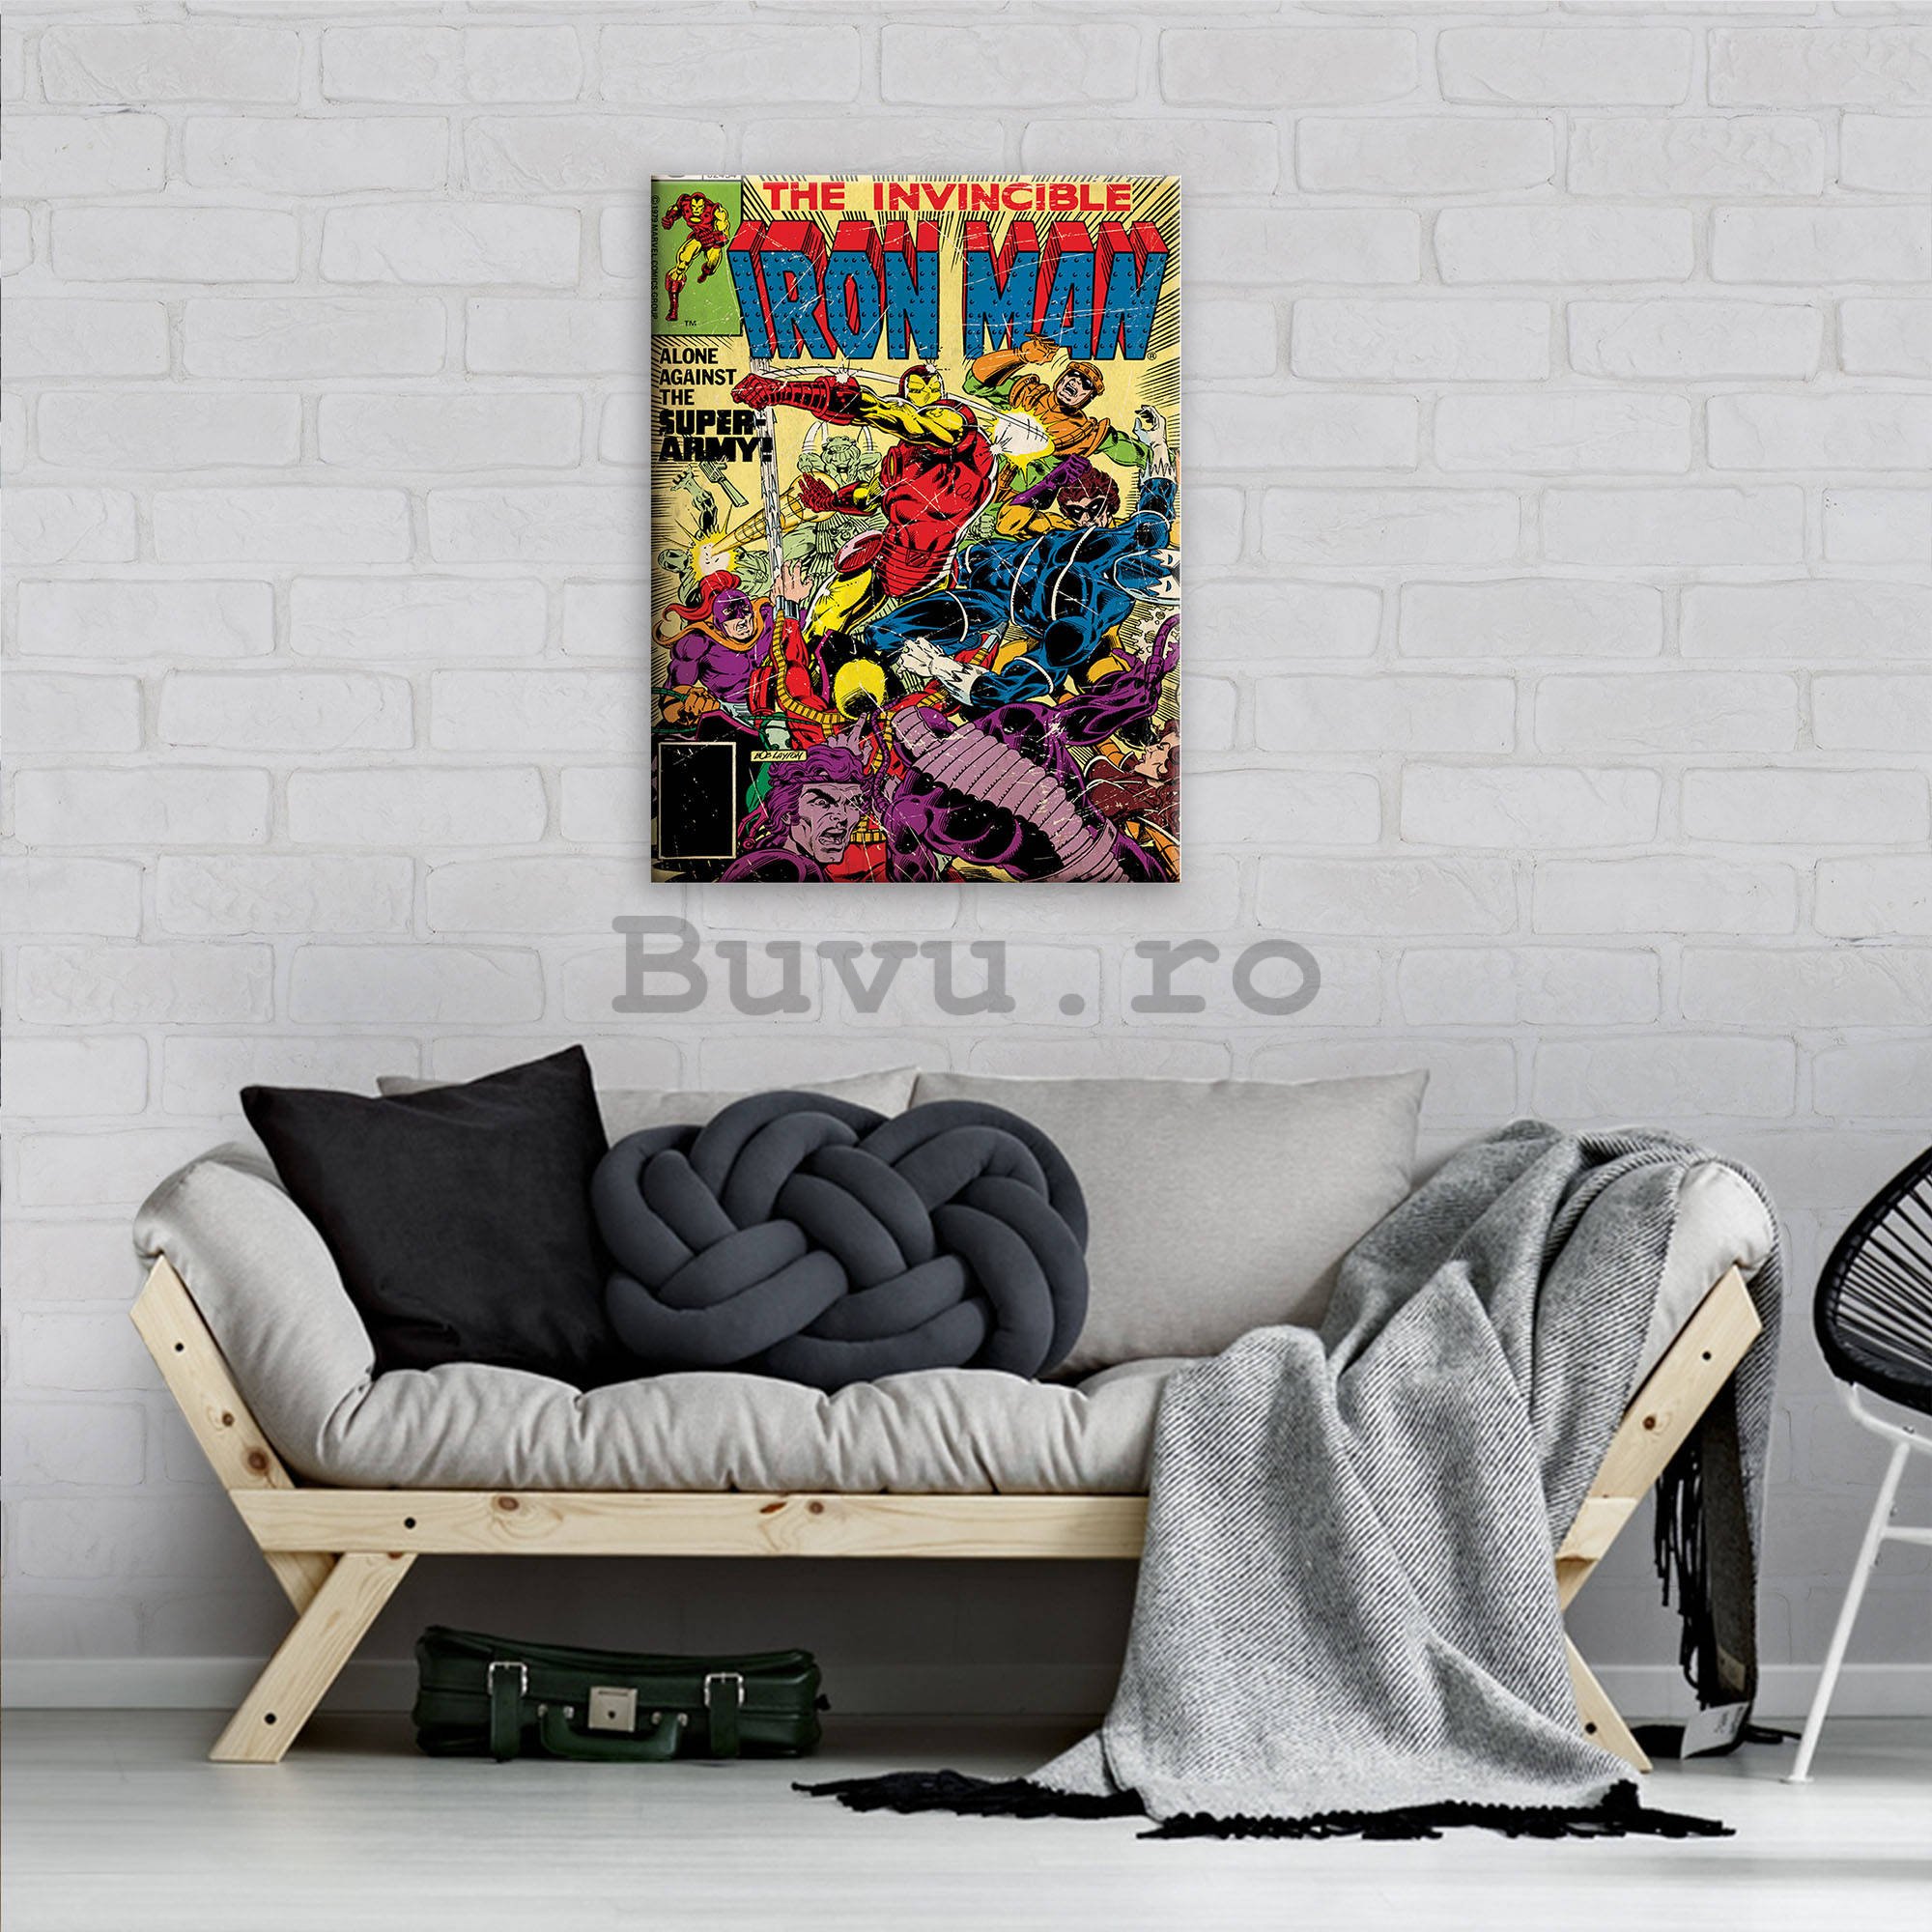 Tablou canvas: The Invincible Iron Man (Alone Against the Super-Army!) - 80x60 cm